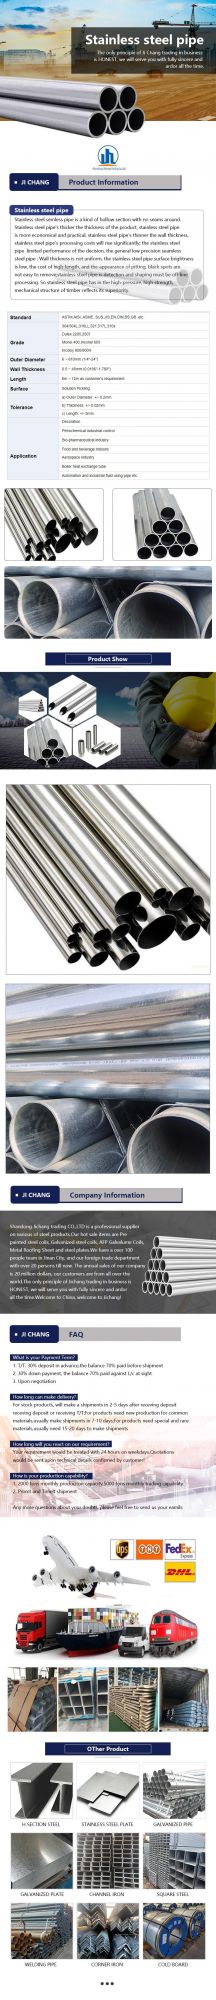 Ss Stainless Steel Tube Capillary Price Per Kg 20 Inch